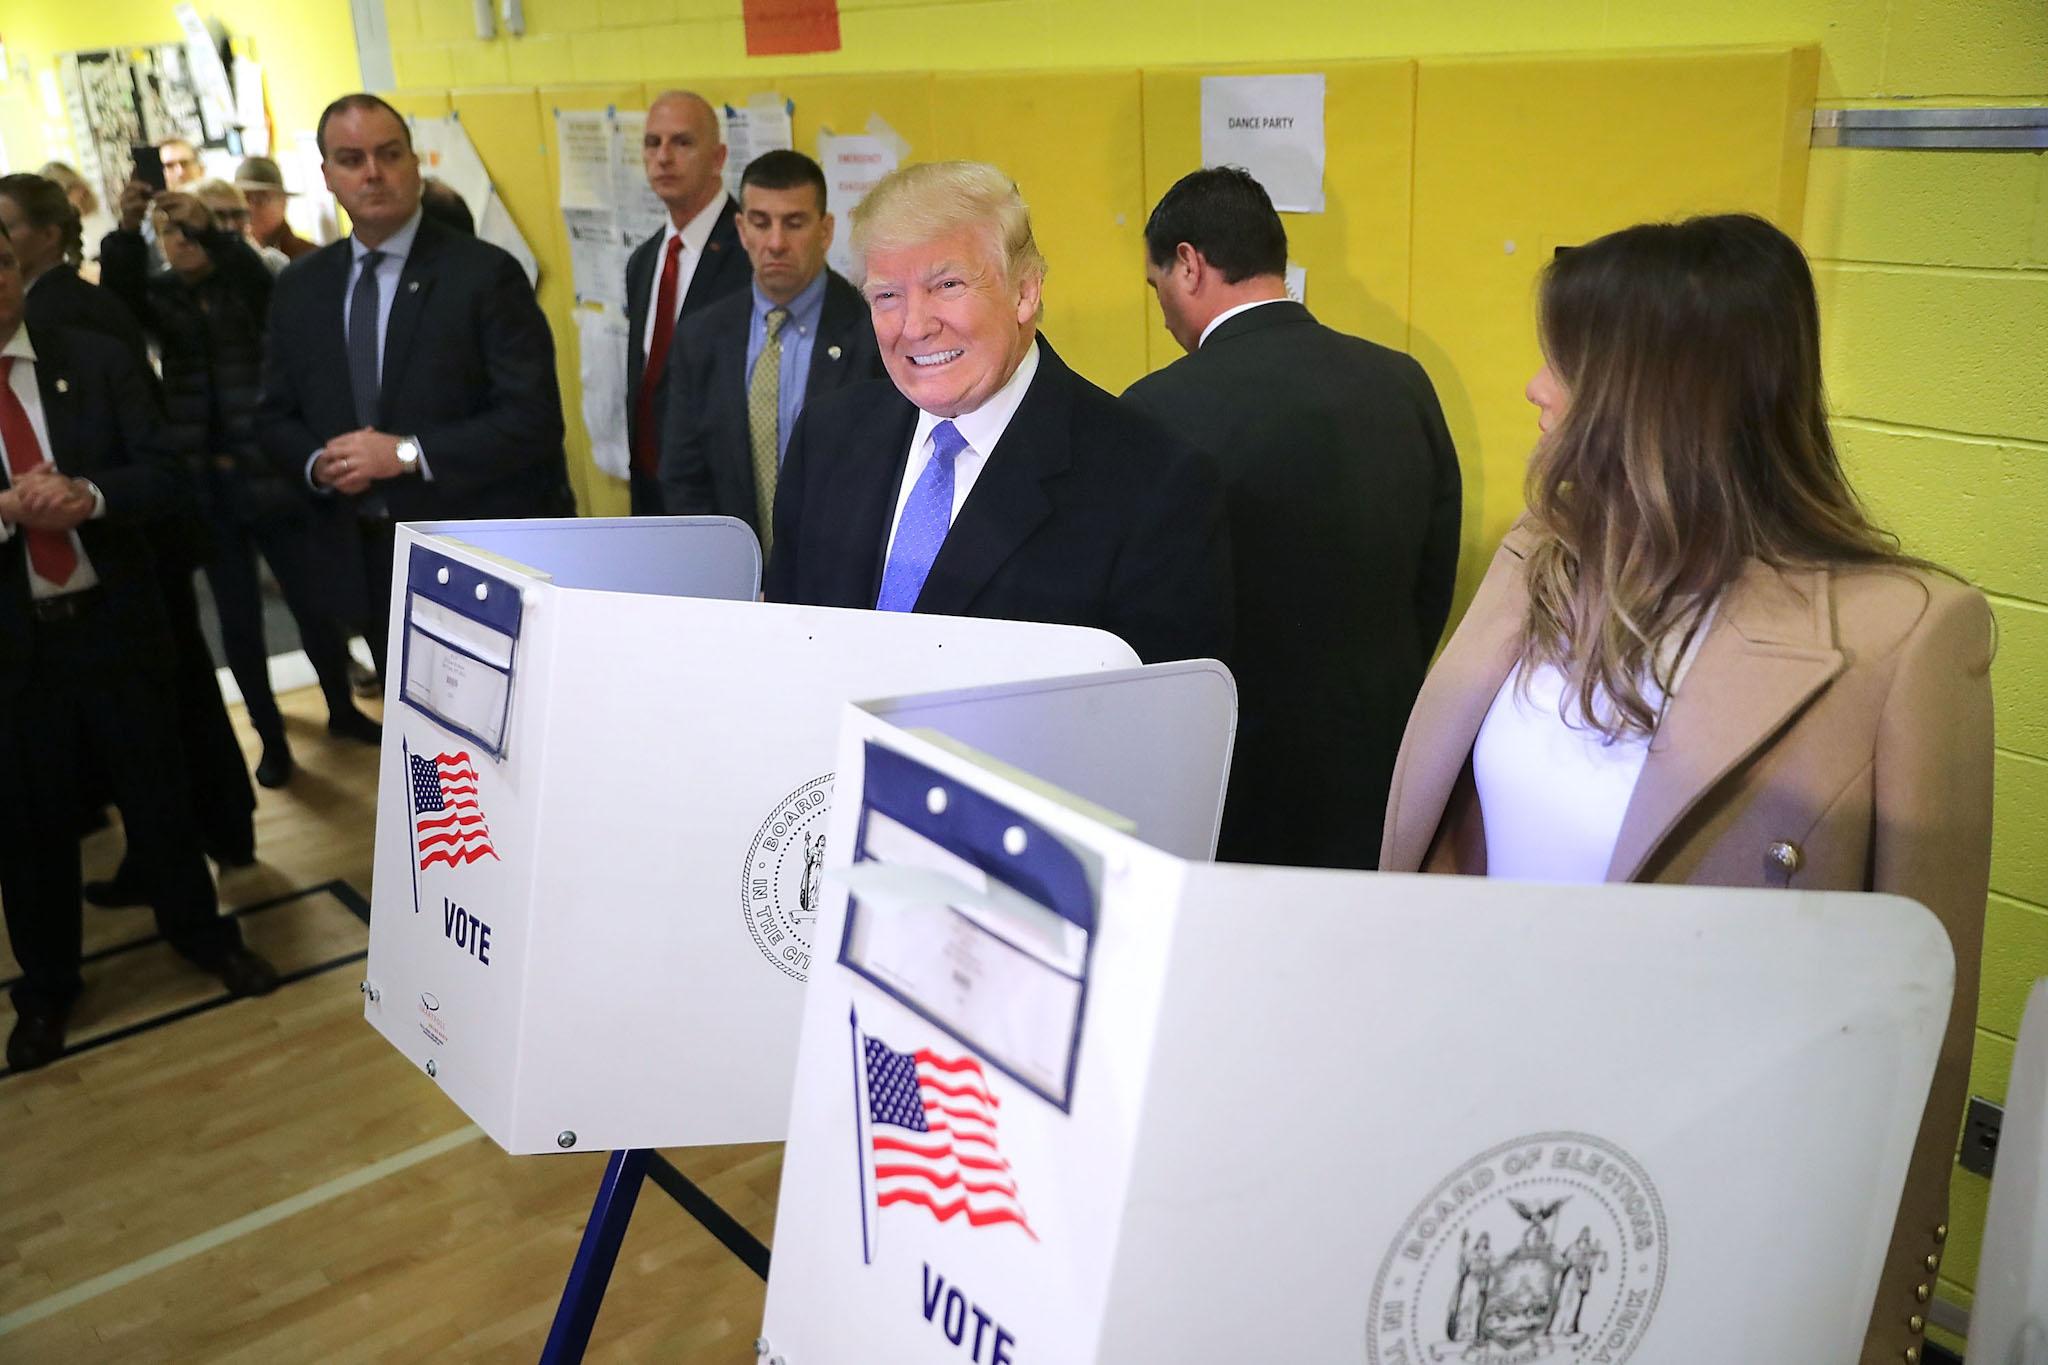 Republican presidential nominee Donald Trump and his wife Melania Trump cast their votes on Election Day at PS 59 November 8, 2016 in New York City